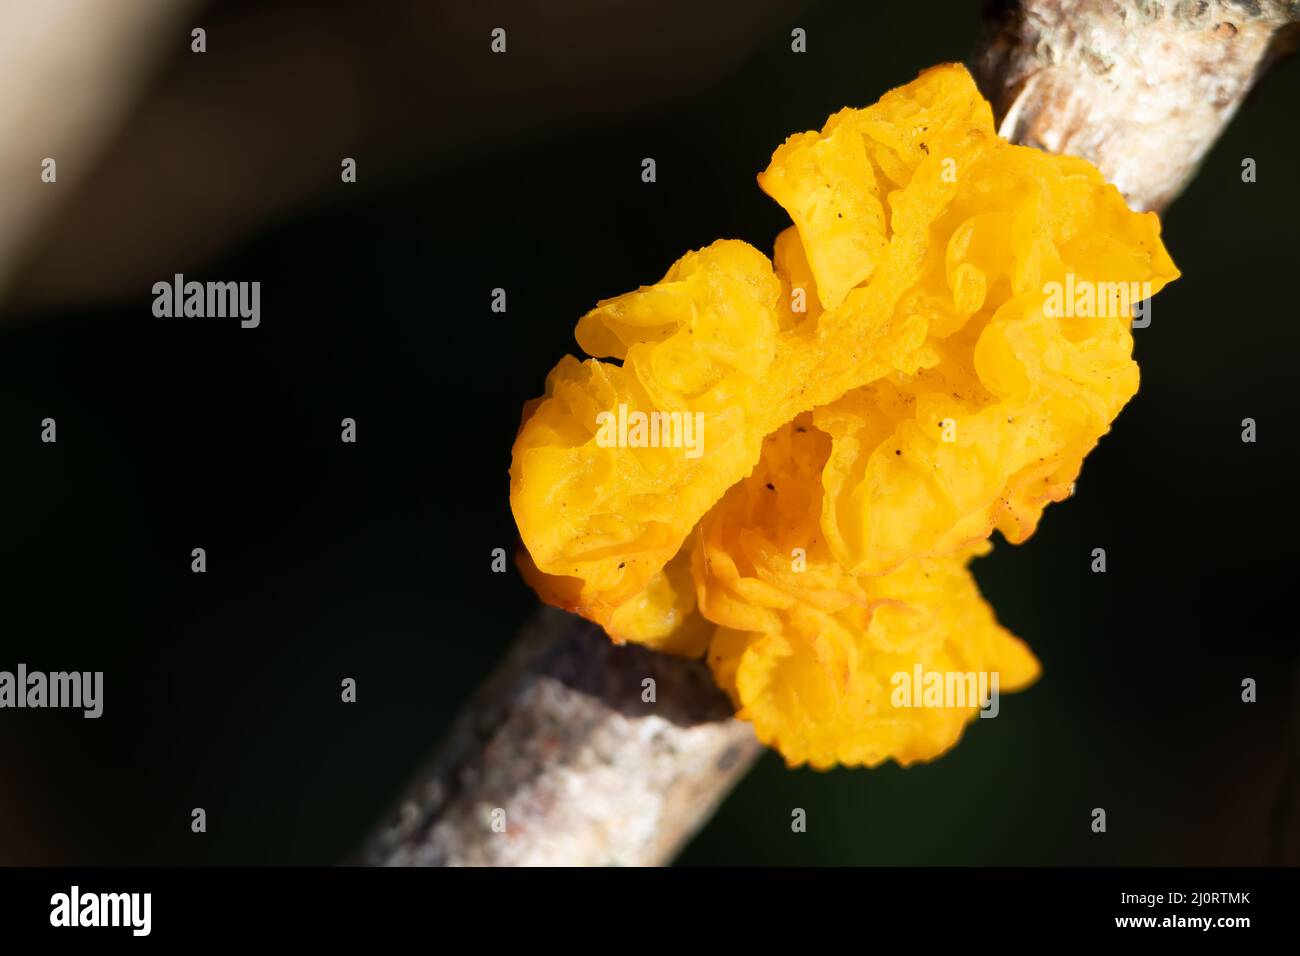 Witch's butter fungus growing on a tree near East Grinstead Stock Photo